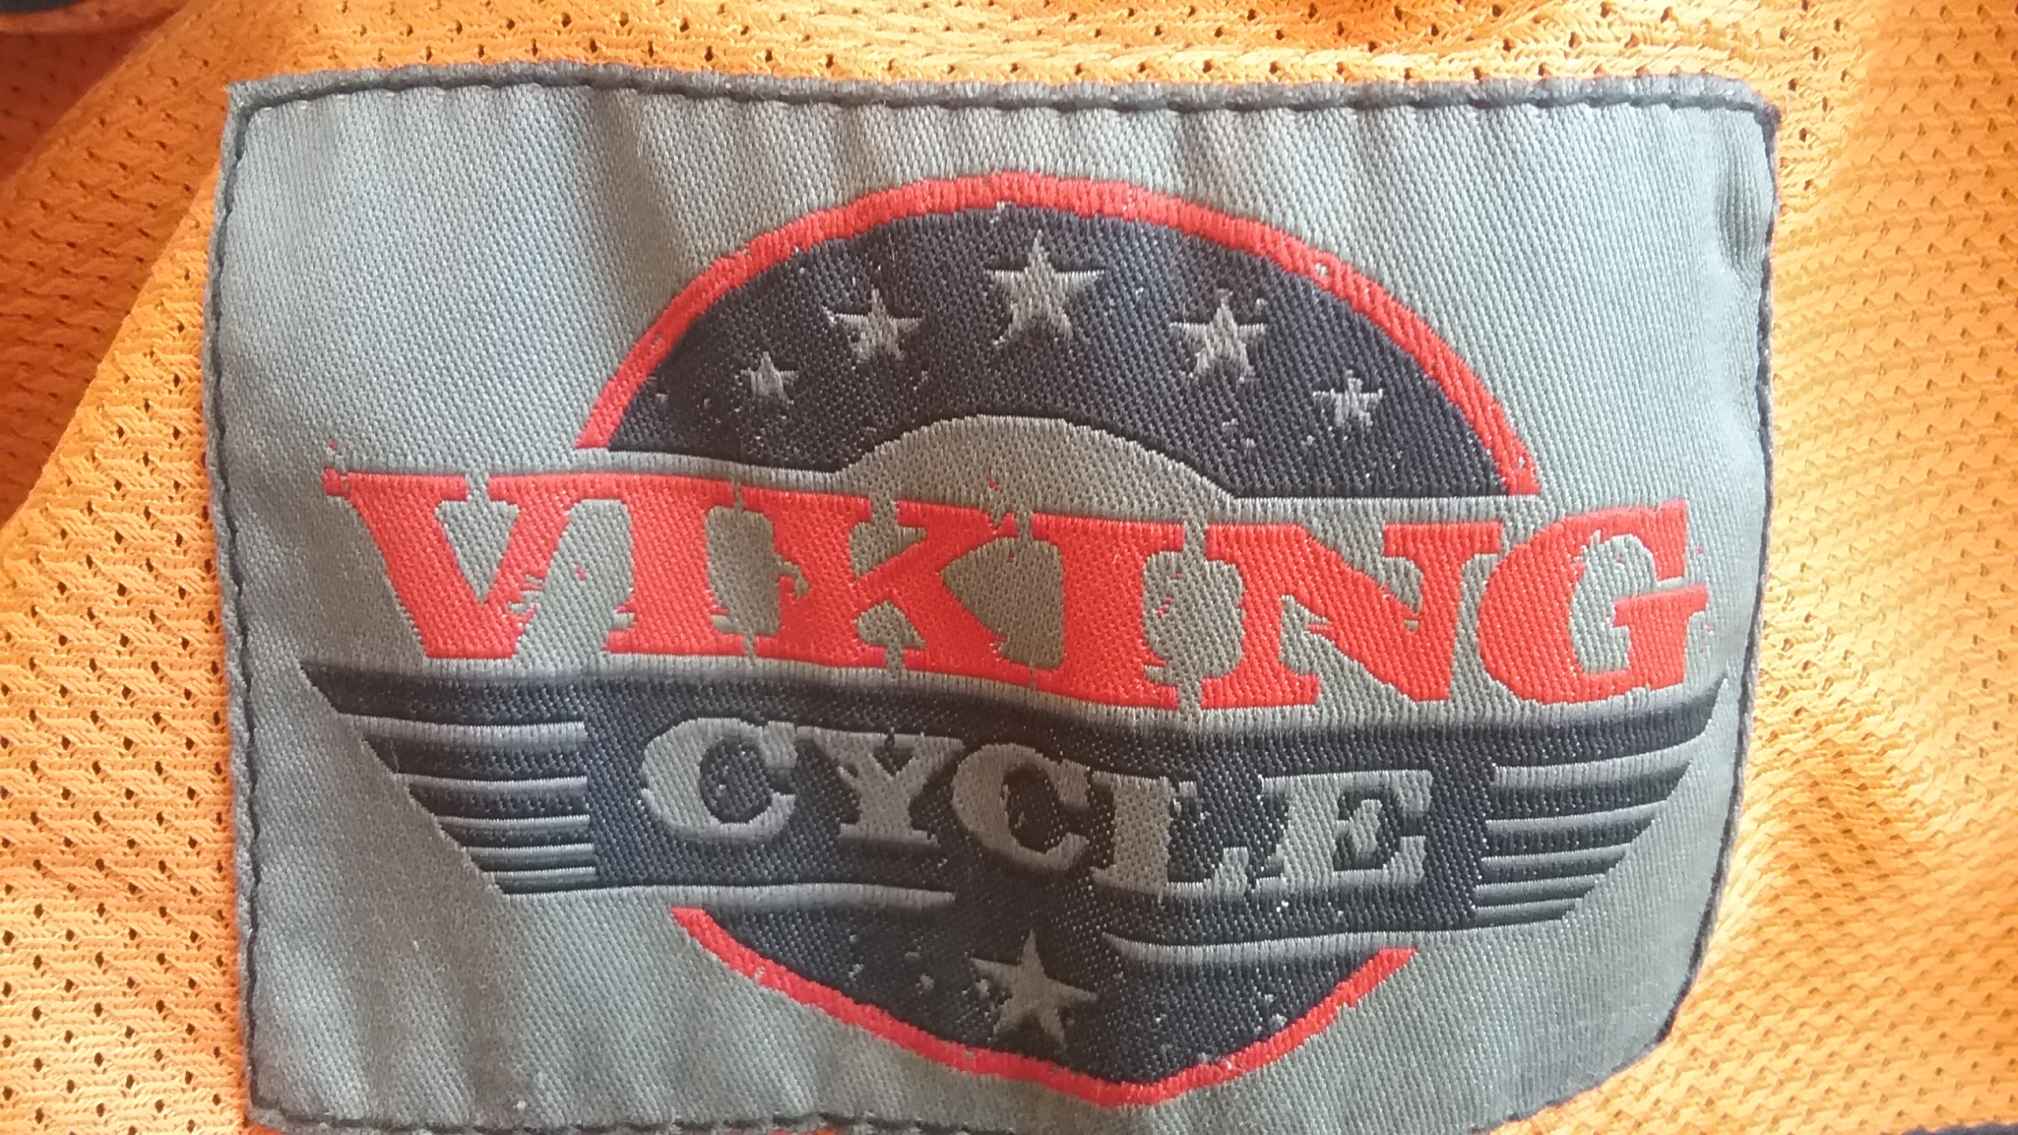 An extreme close-up of the inside lining of a leather vest. A gray, black and red label displays the manufacturers logo "Viking Cycle", on a perforated orange background.